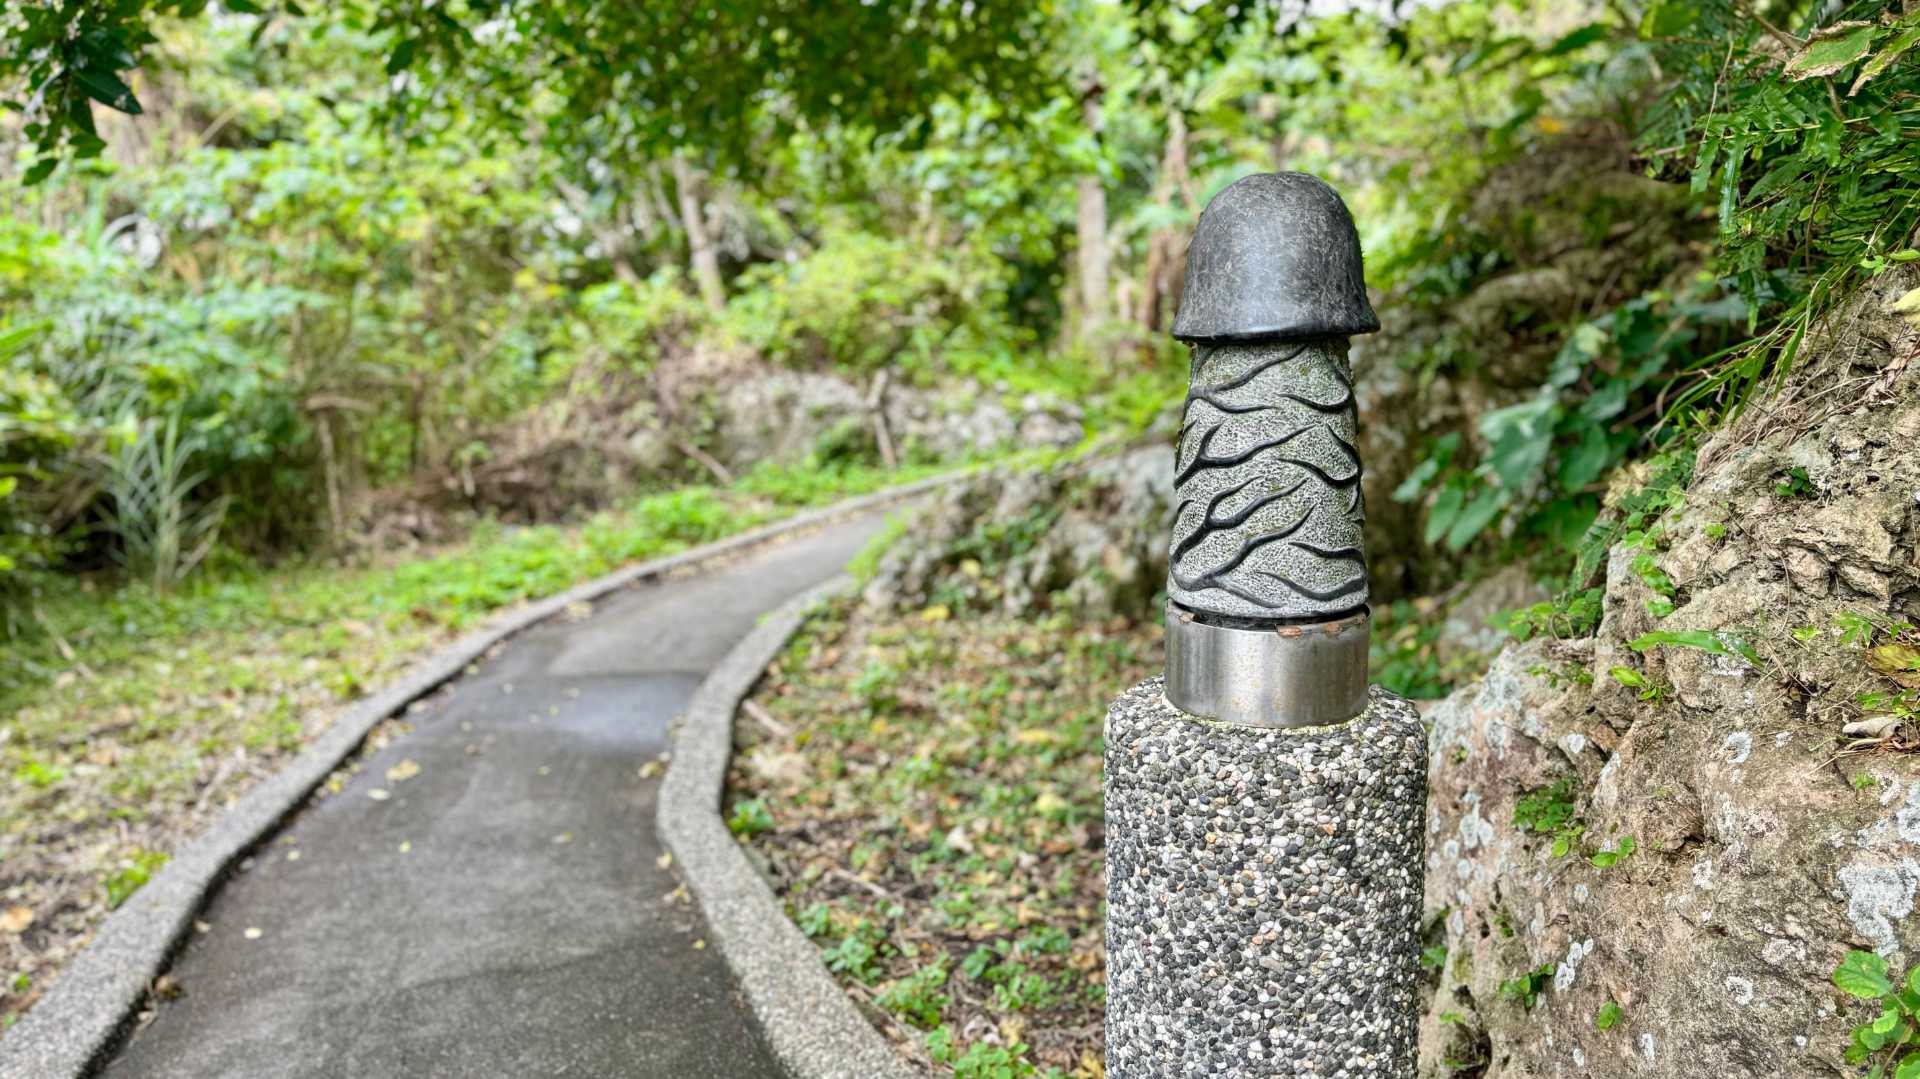 A small stone sculpture of an erect penis, perhaps 30cm tall, mounted on a stone post next to a curved pathway.